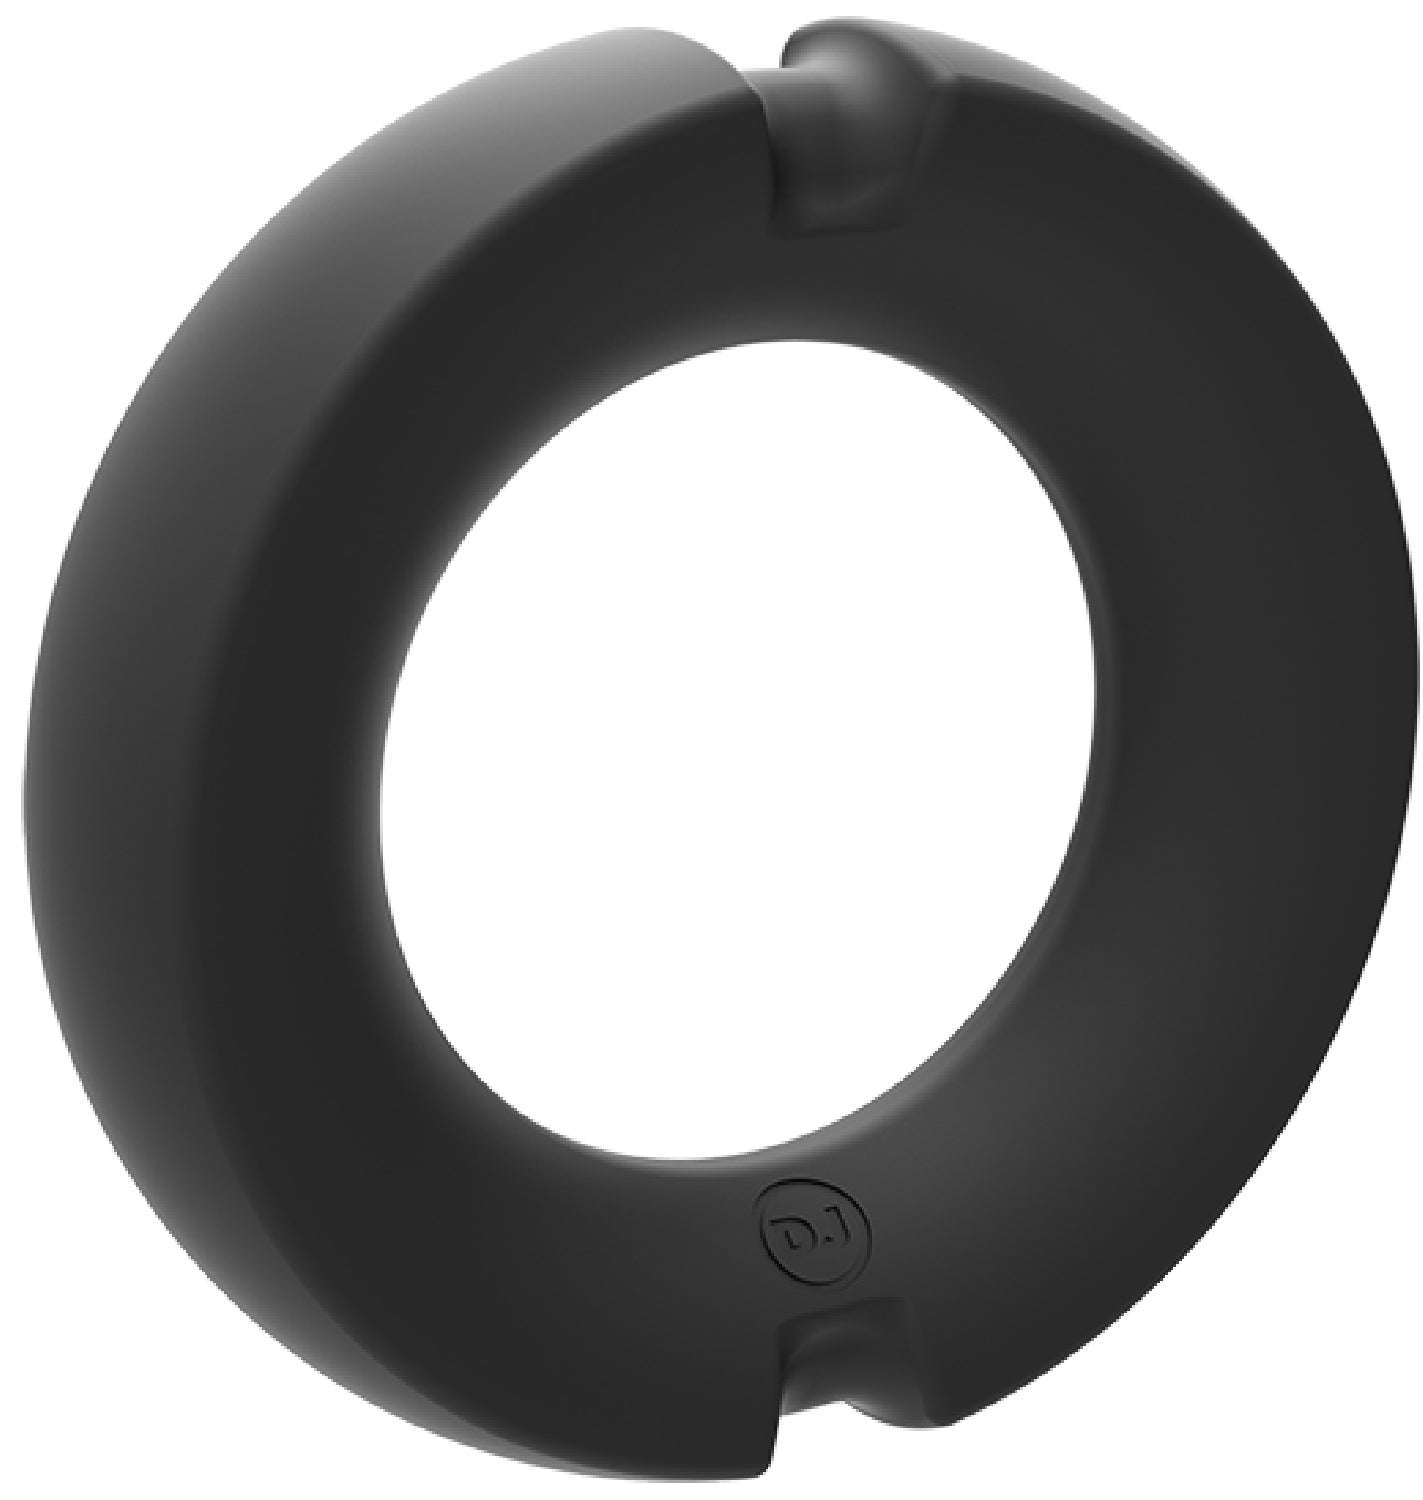 Silicone-Covered Metal Cock Ring - 35mm